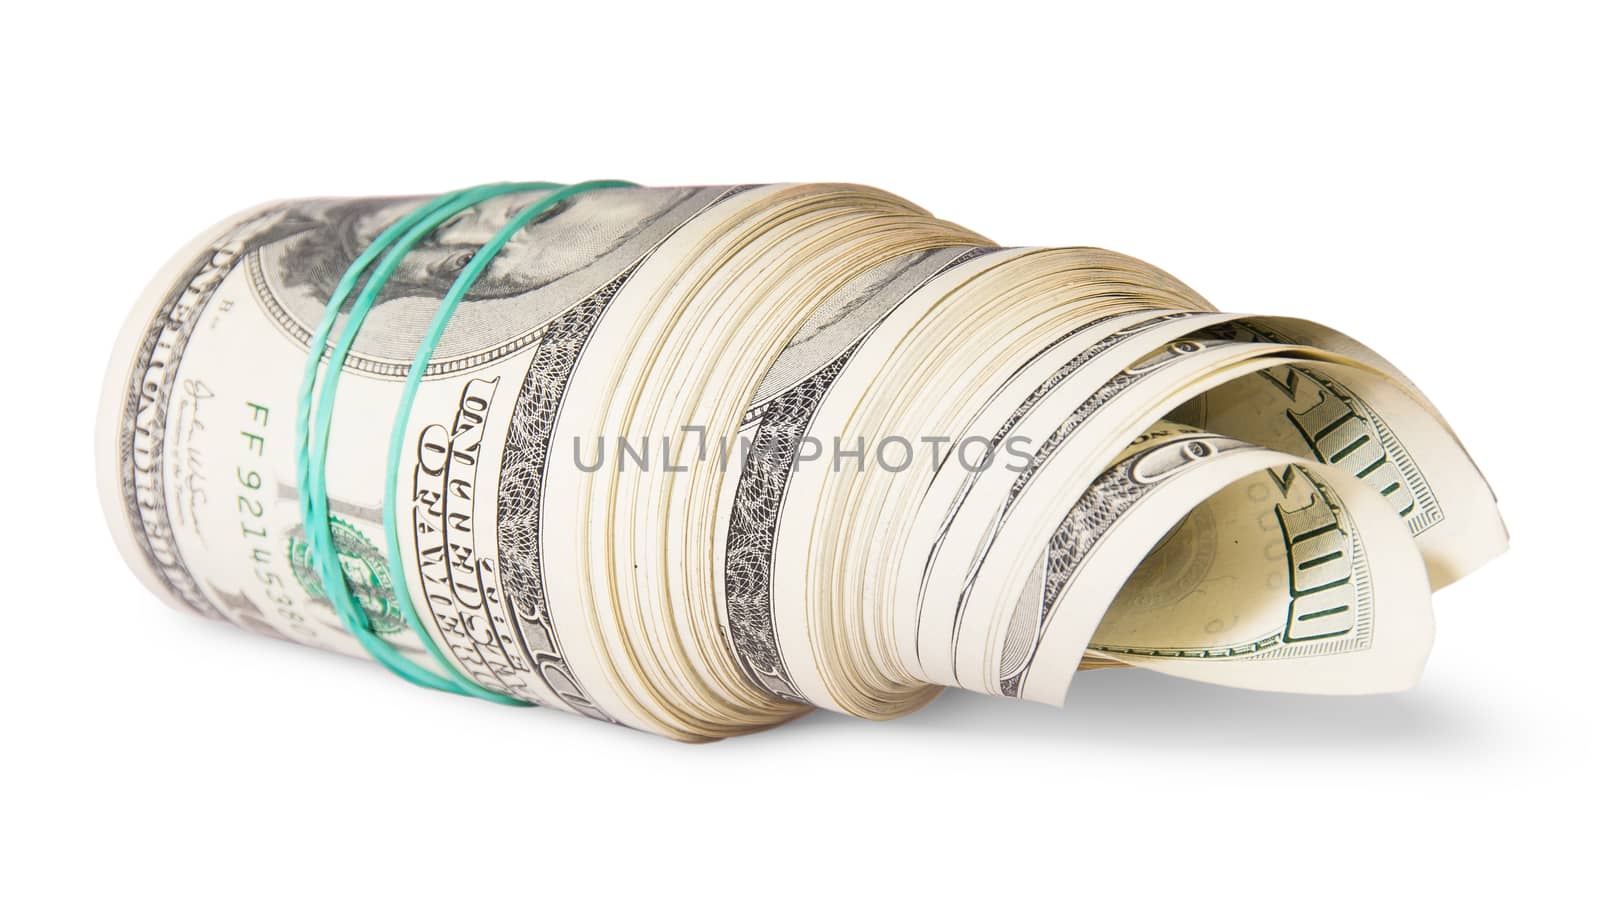 Roll of money on the side isolated on white background